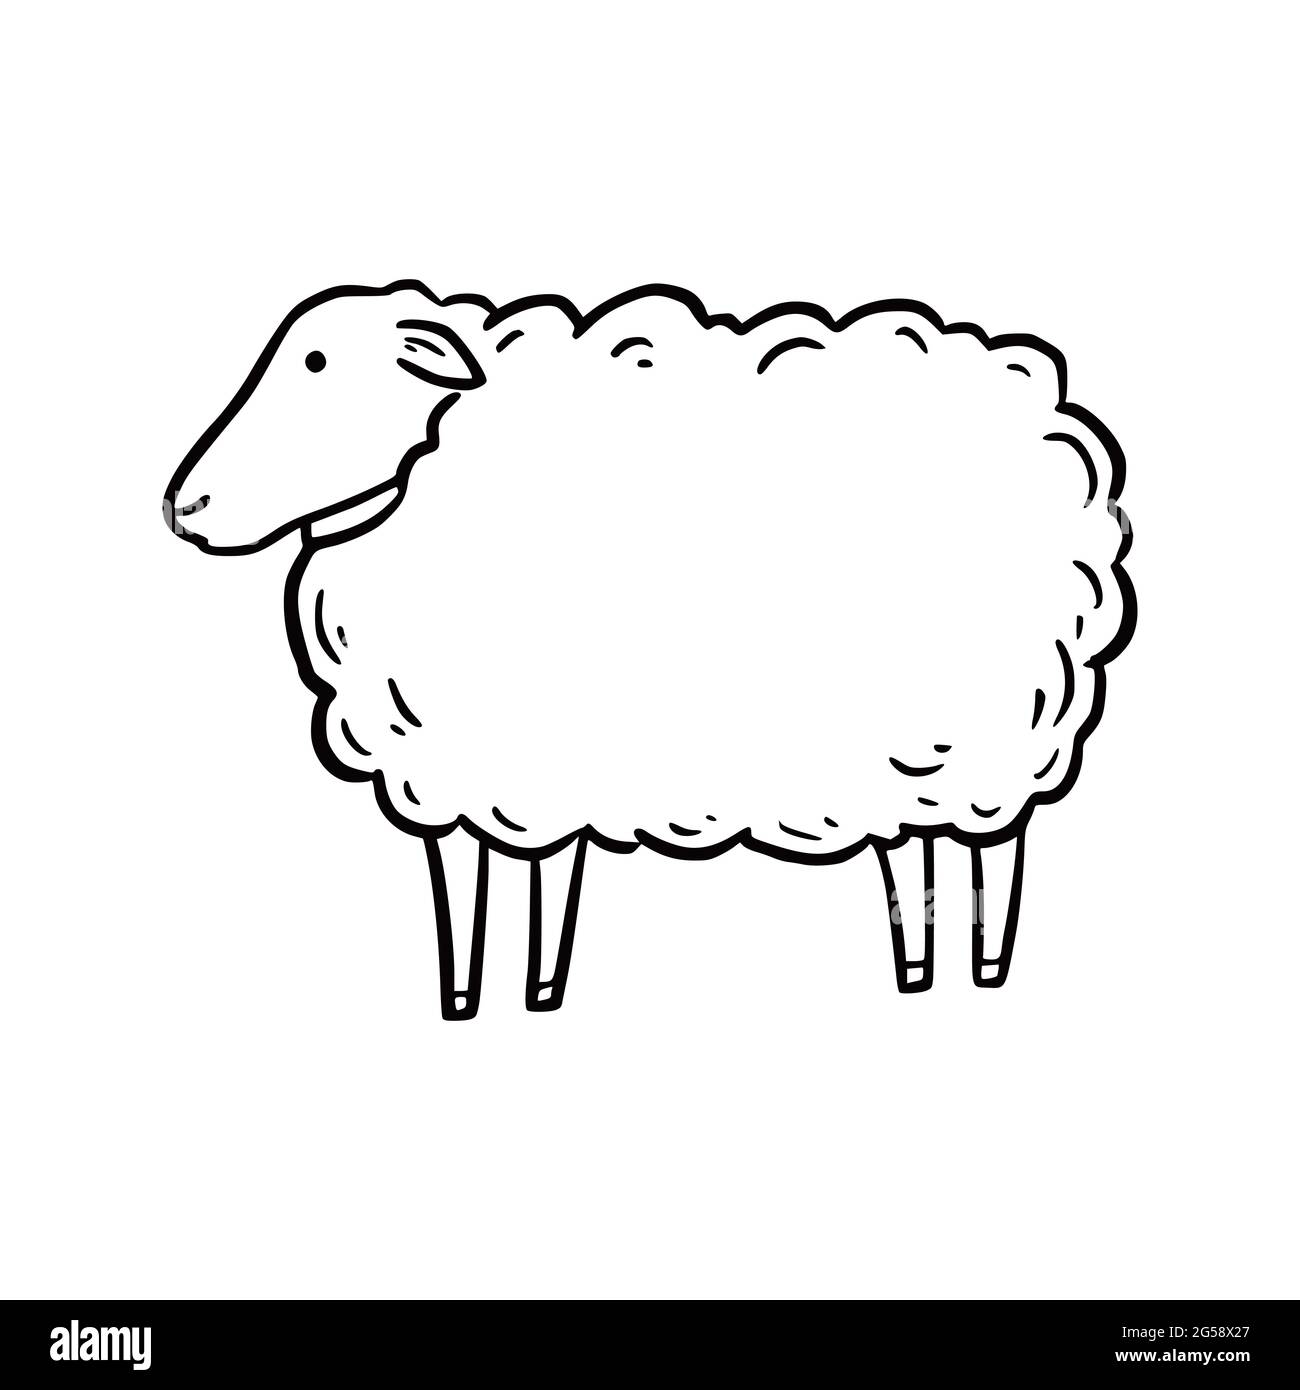 Hand drawn sheep. Doodle sketch style. Drawing line simple sheep icon